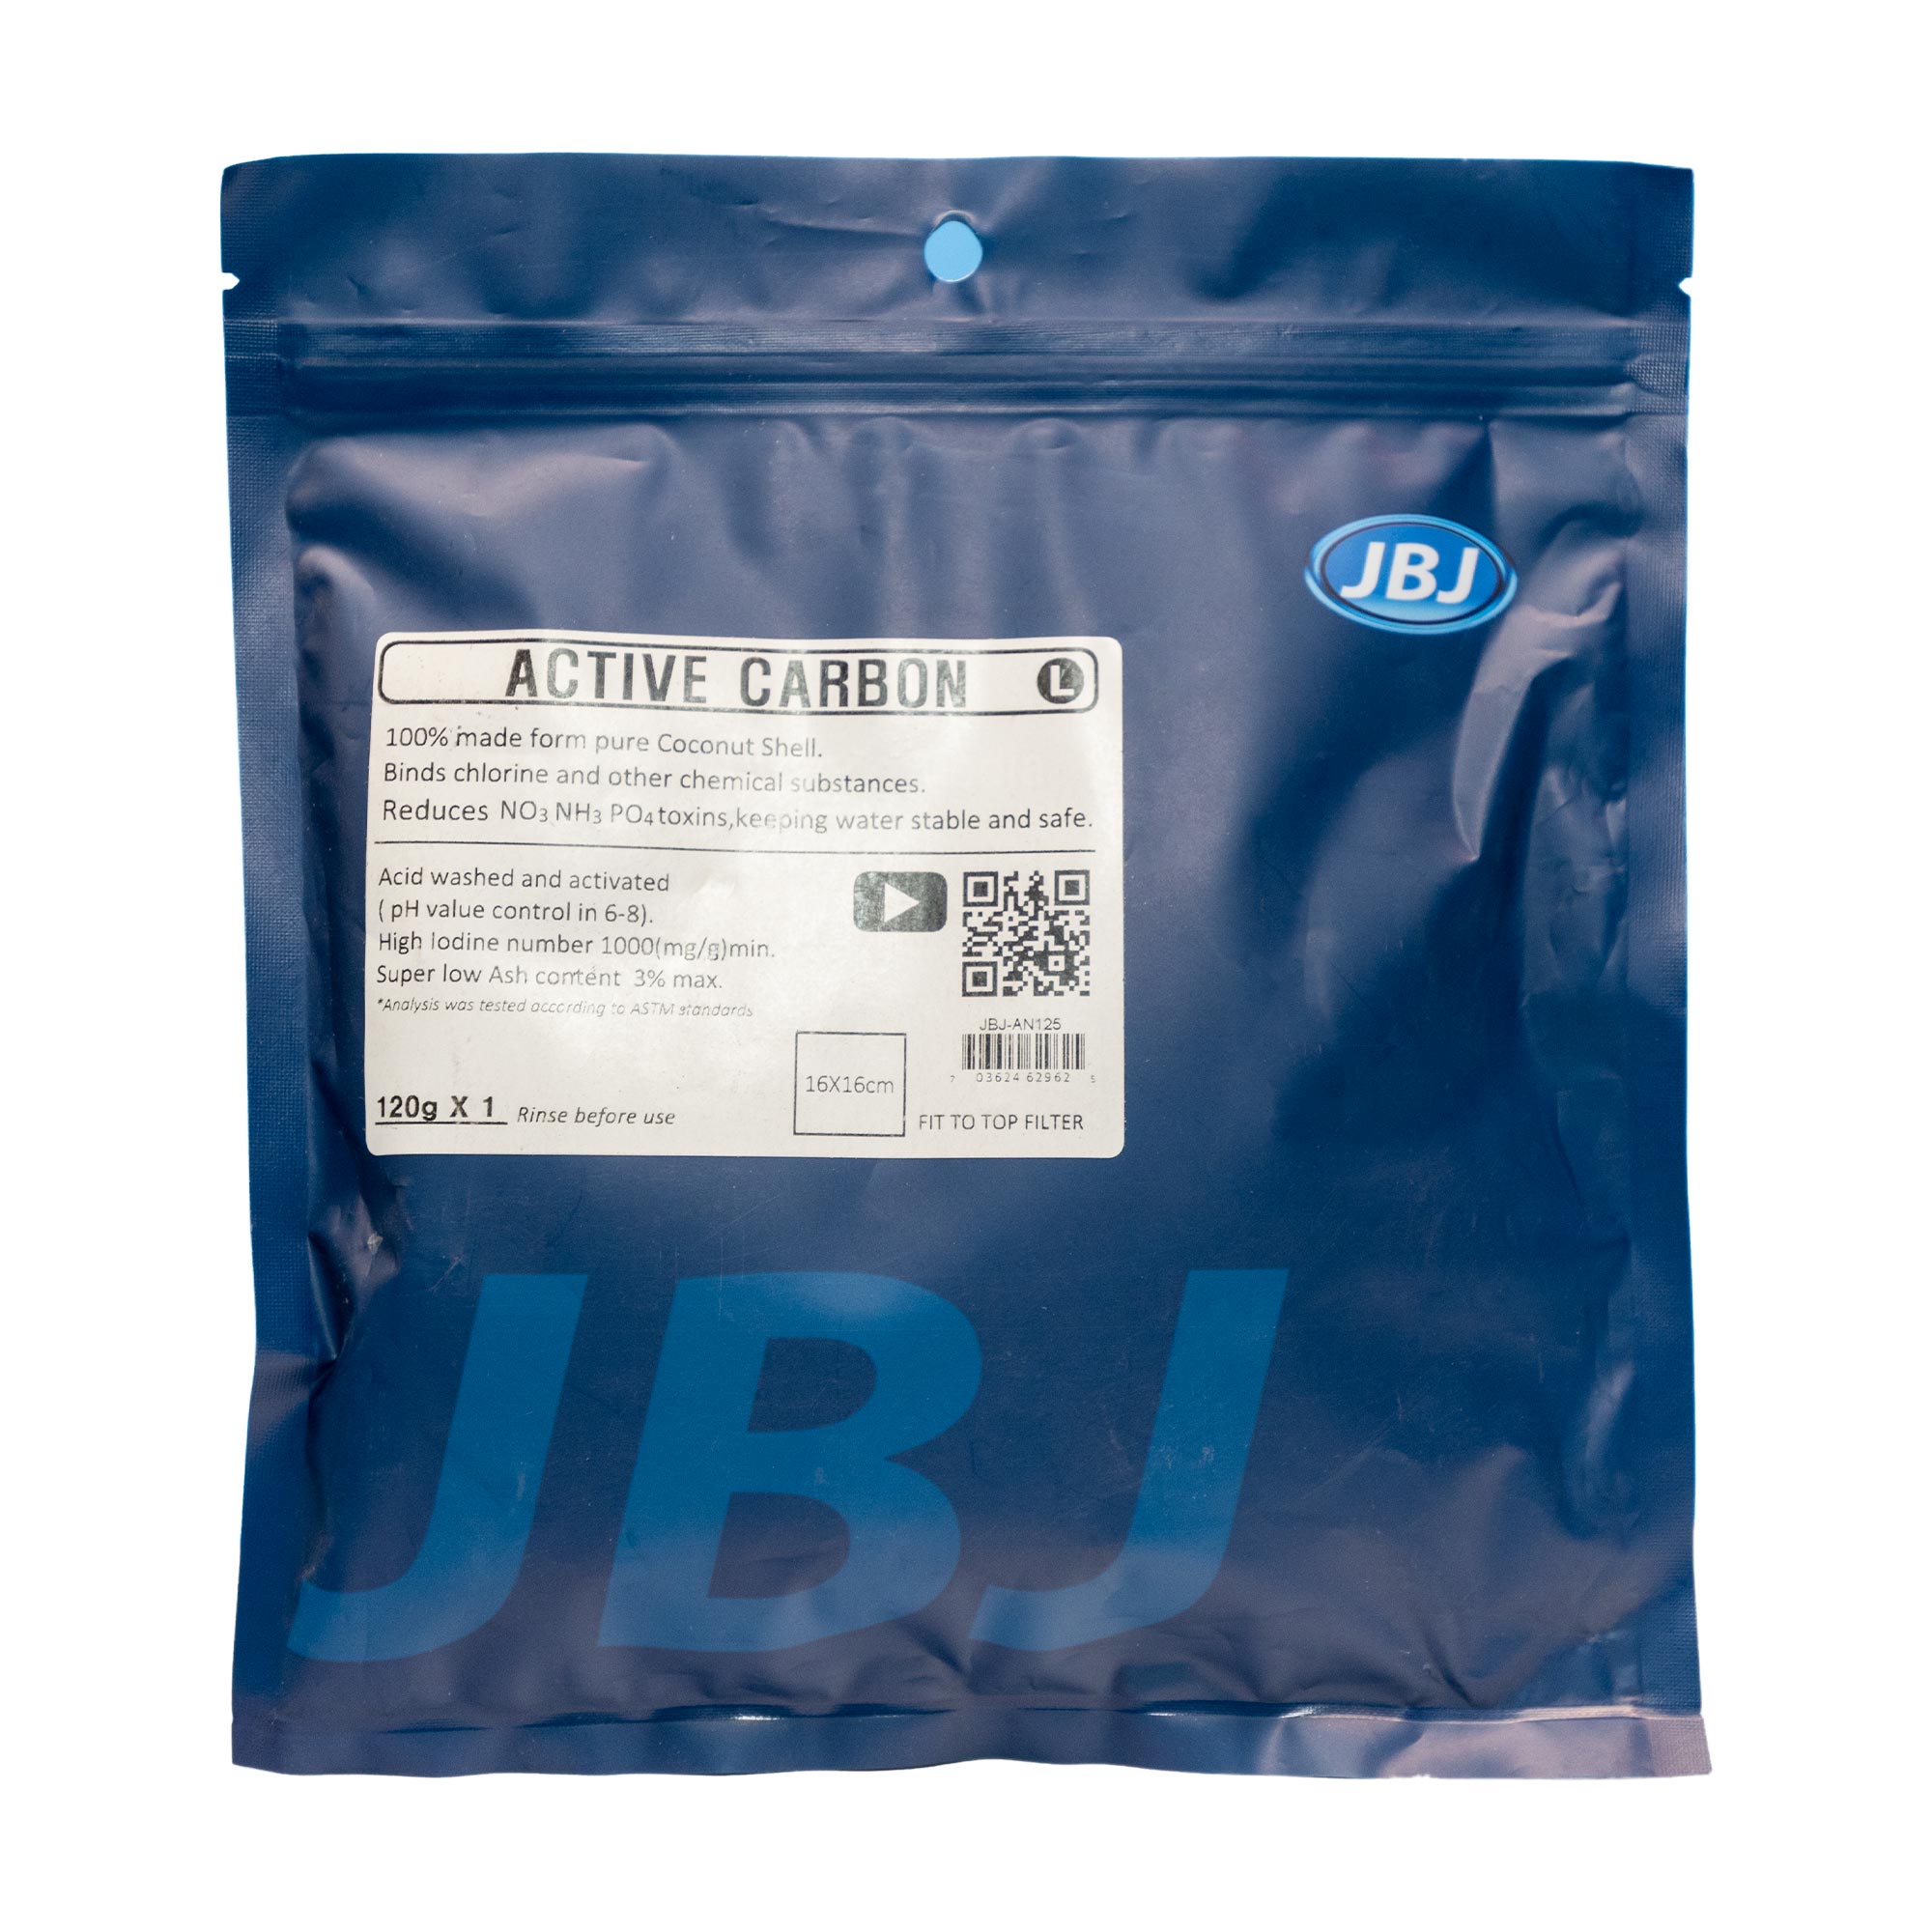 Activated Carbon - 120G x 2